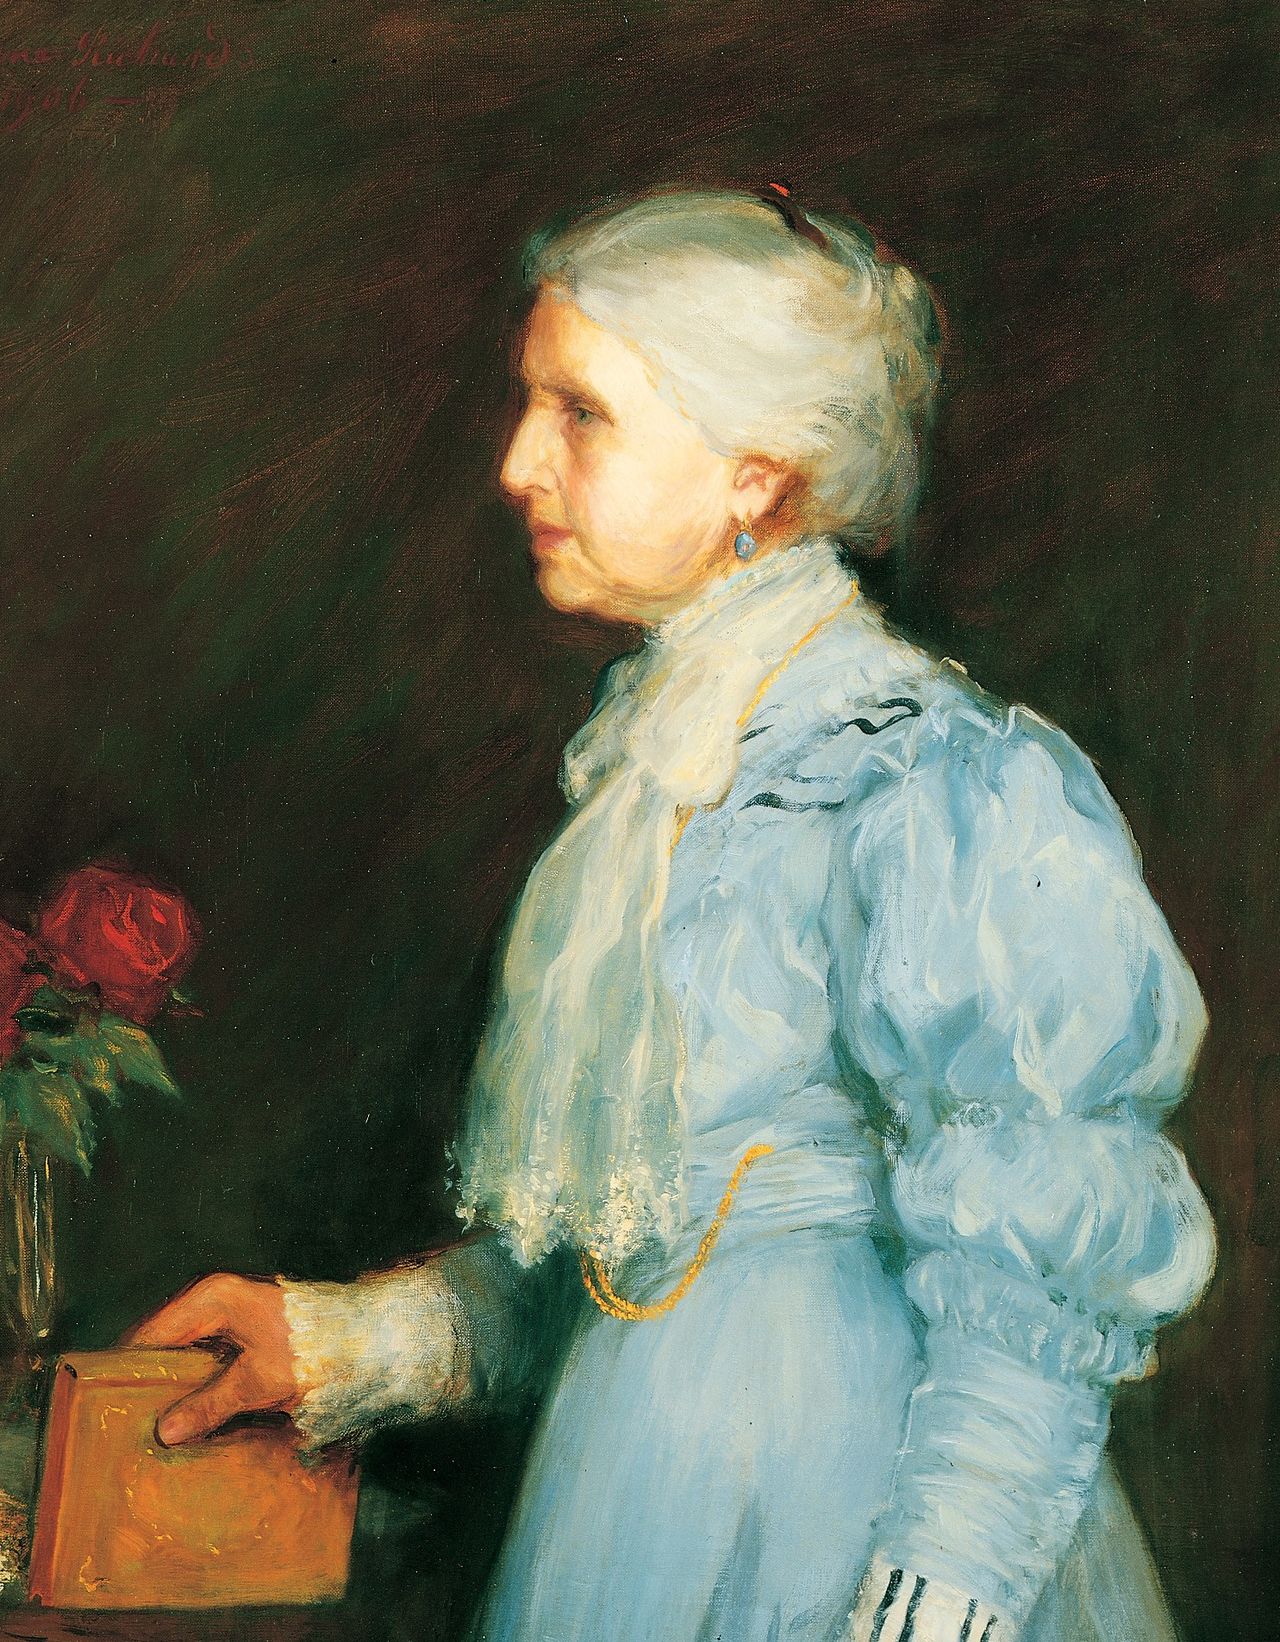 A portrait of Emmeline B. Woodward Wells, who was the fifth general president of the Relief Society from 1910 to 1921; painted by Lee Greene Richards.